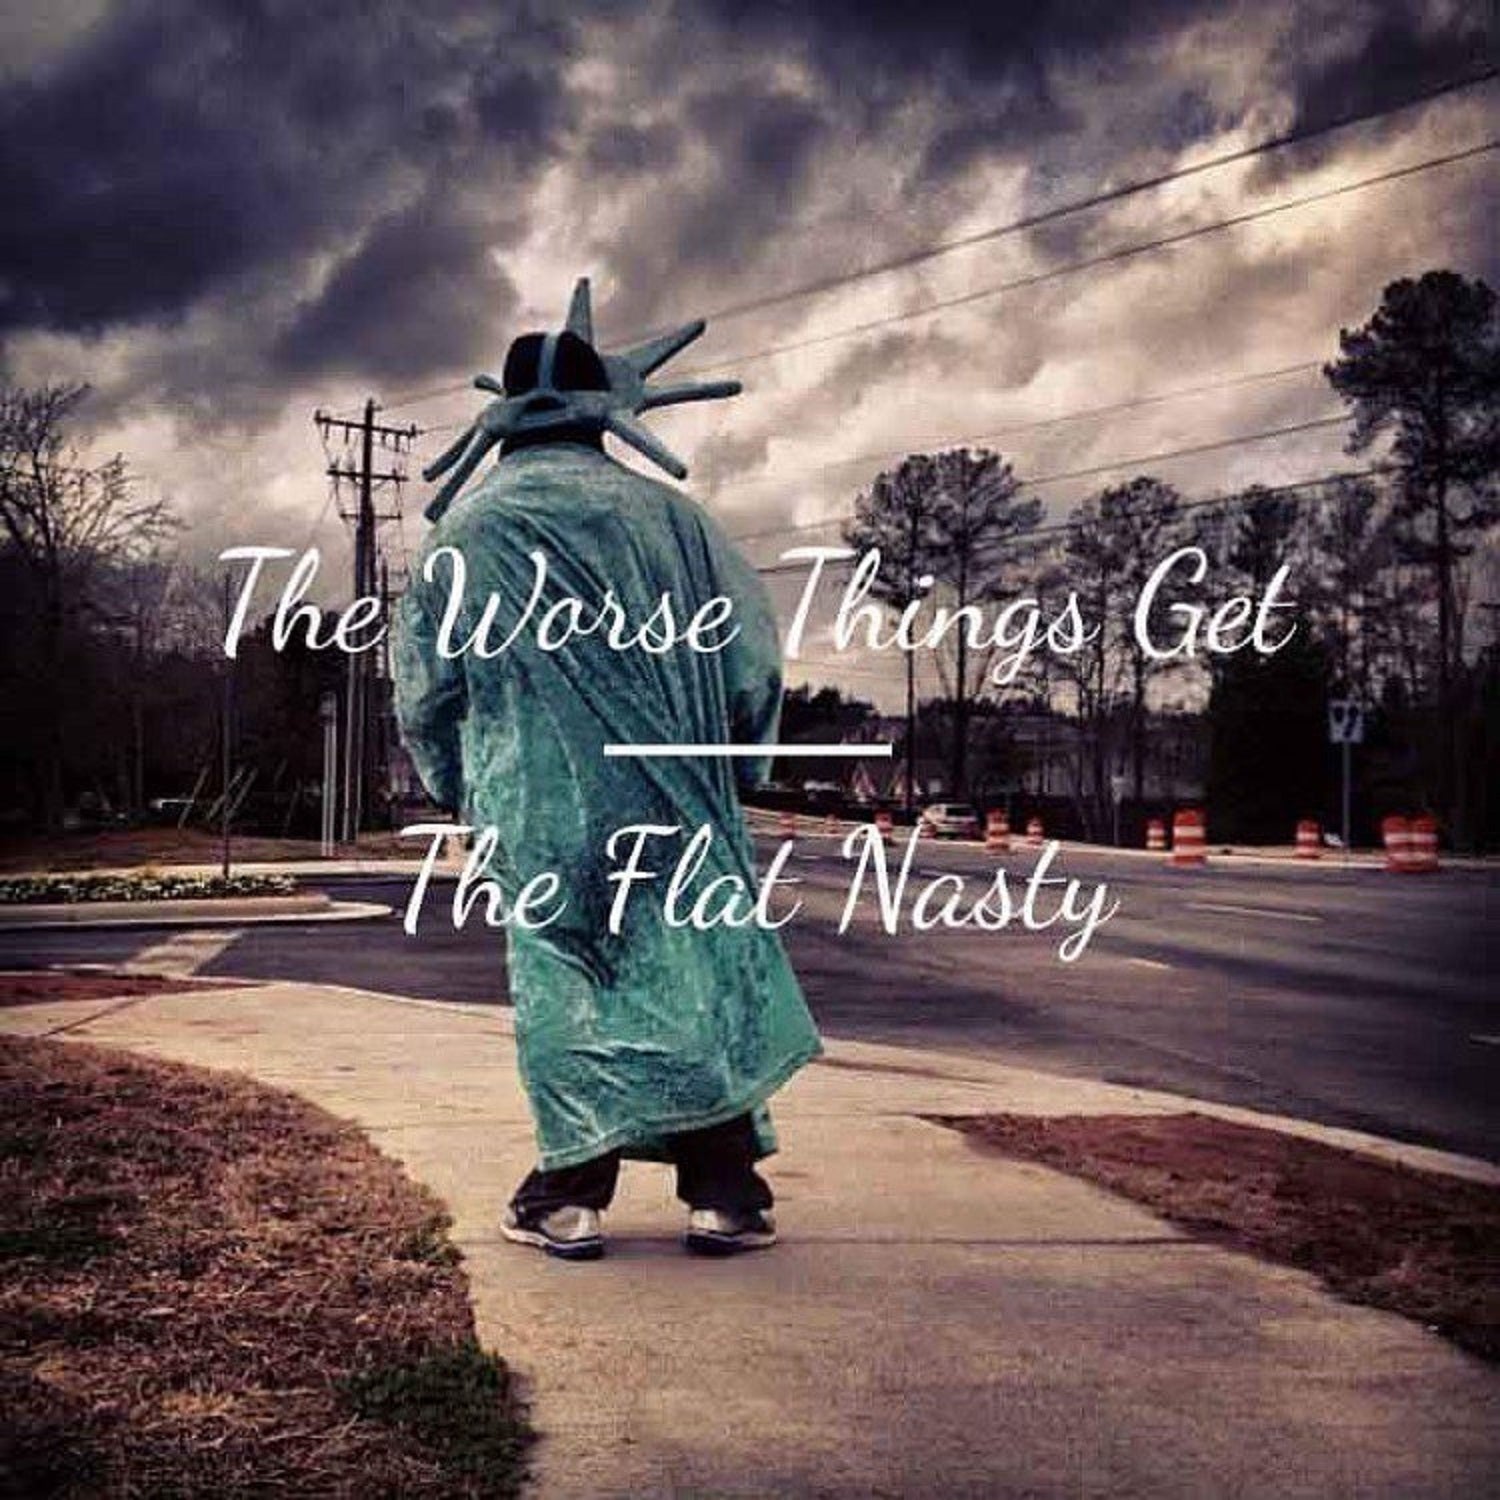 The Flat Nasty – ‘The Worse Things Get’